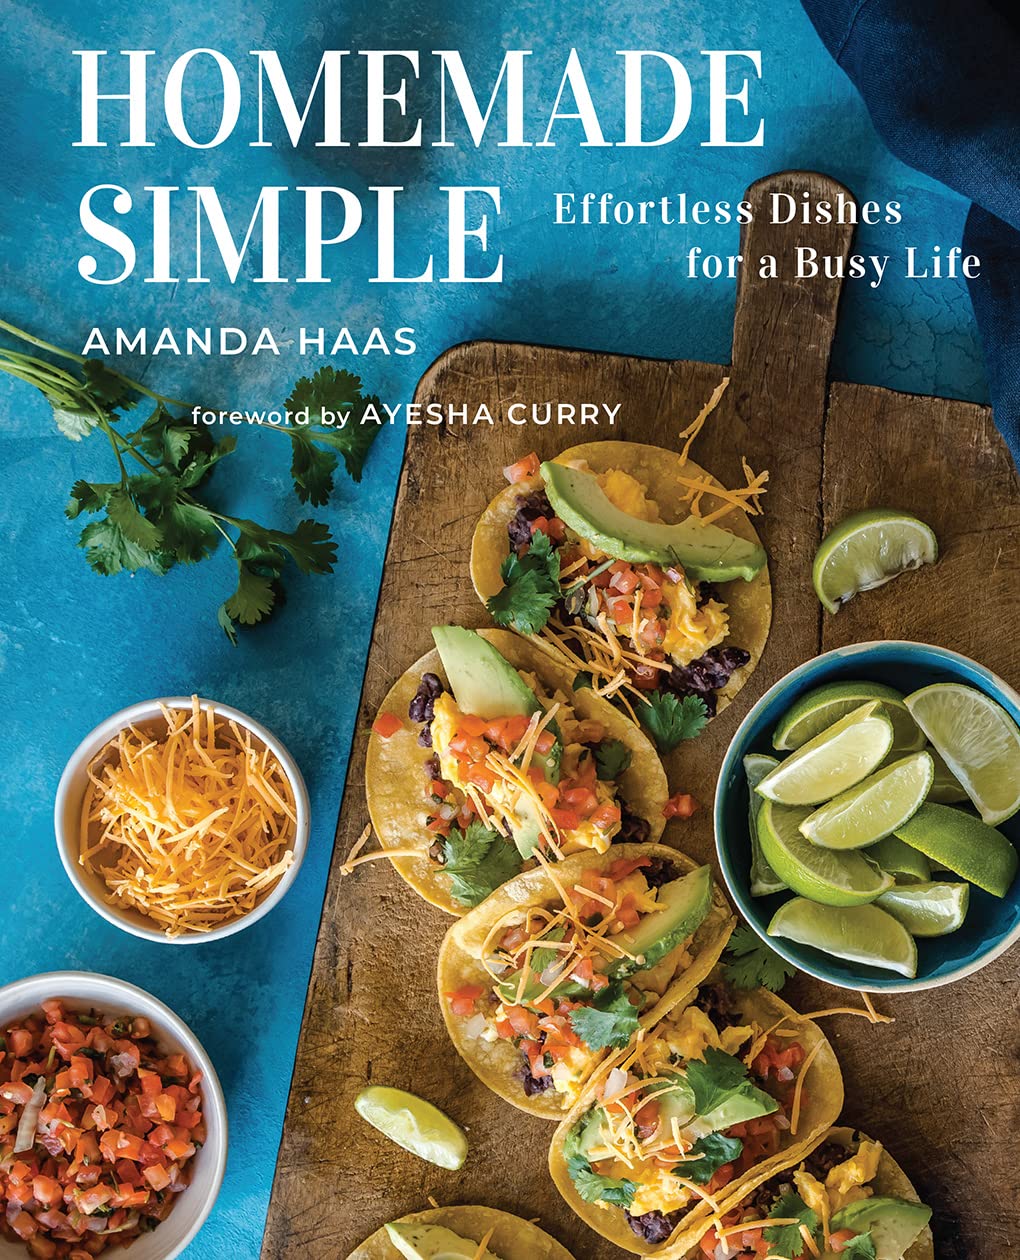 Homemade Simple cookbook cover with breakfast tacos on a wooden board and blue table